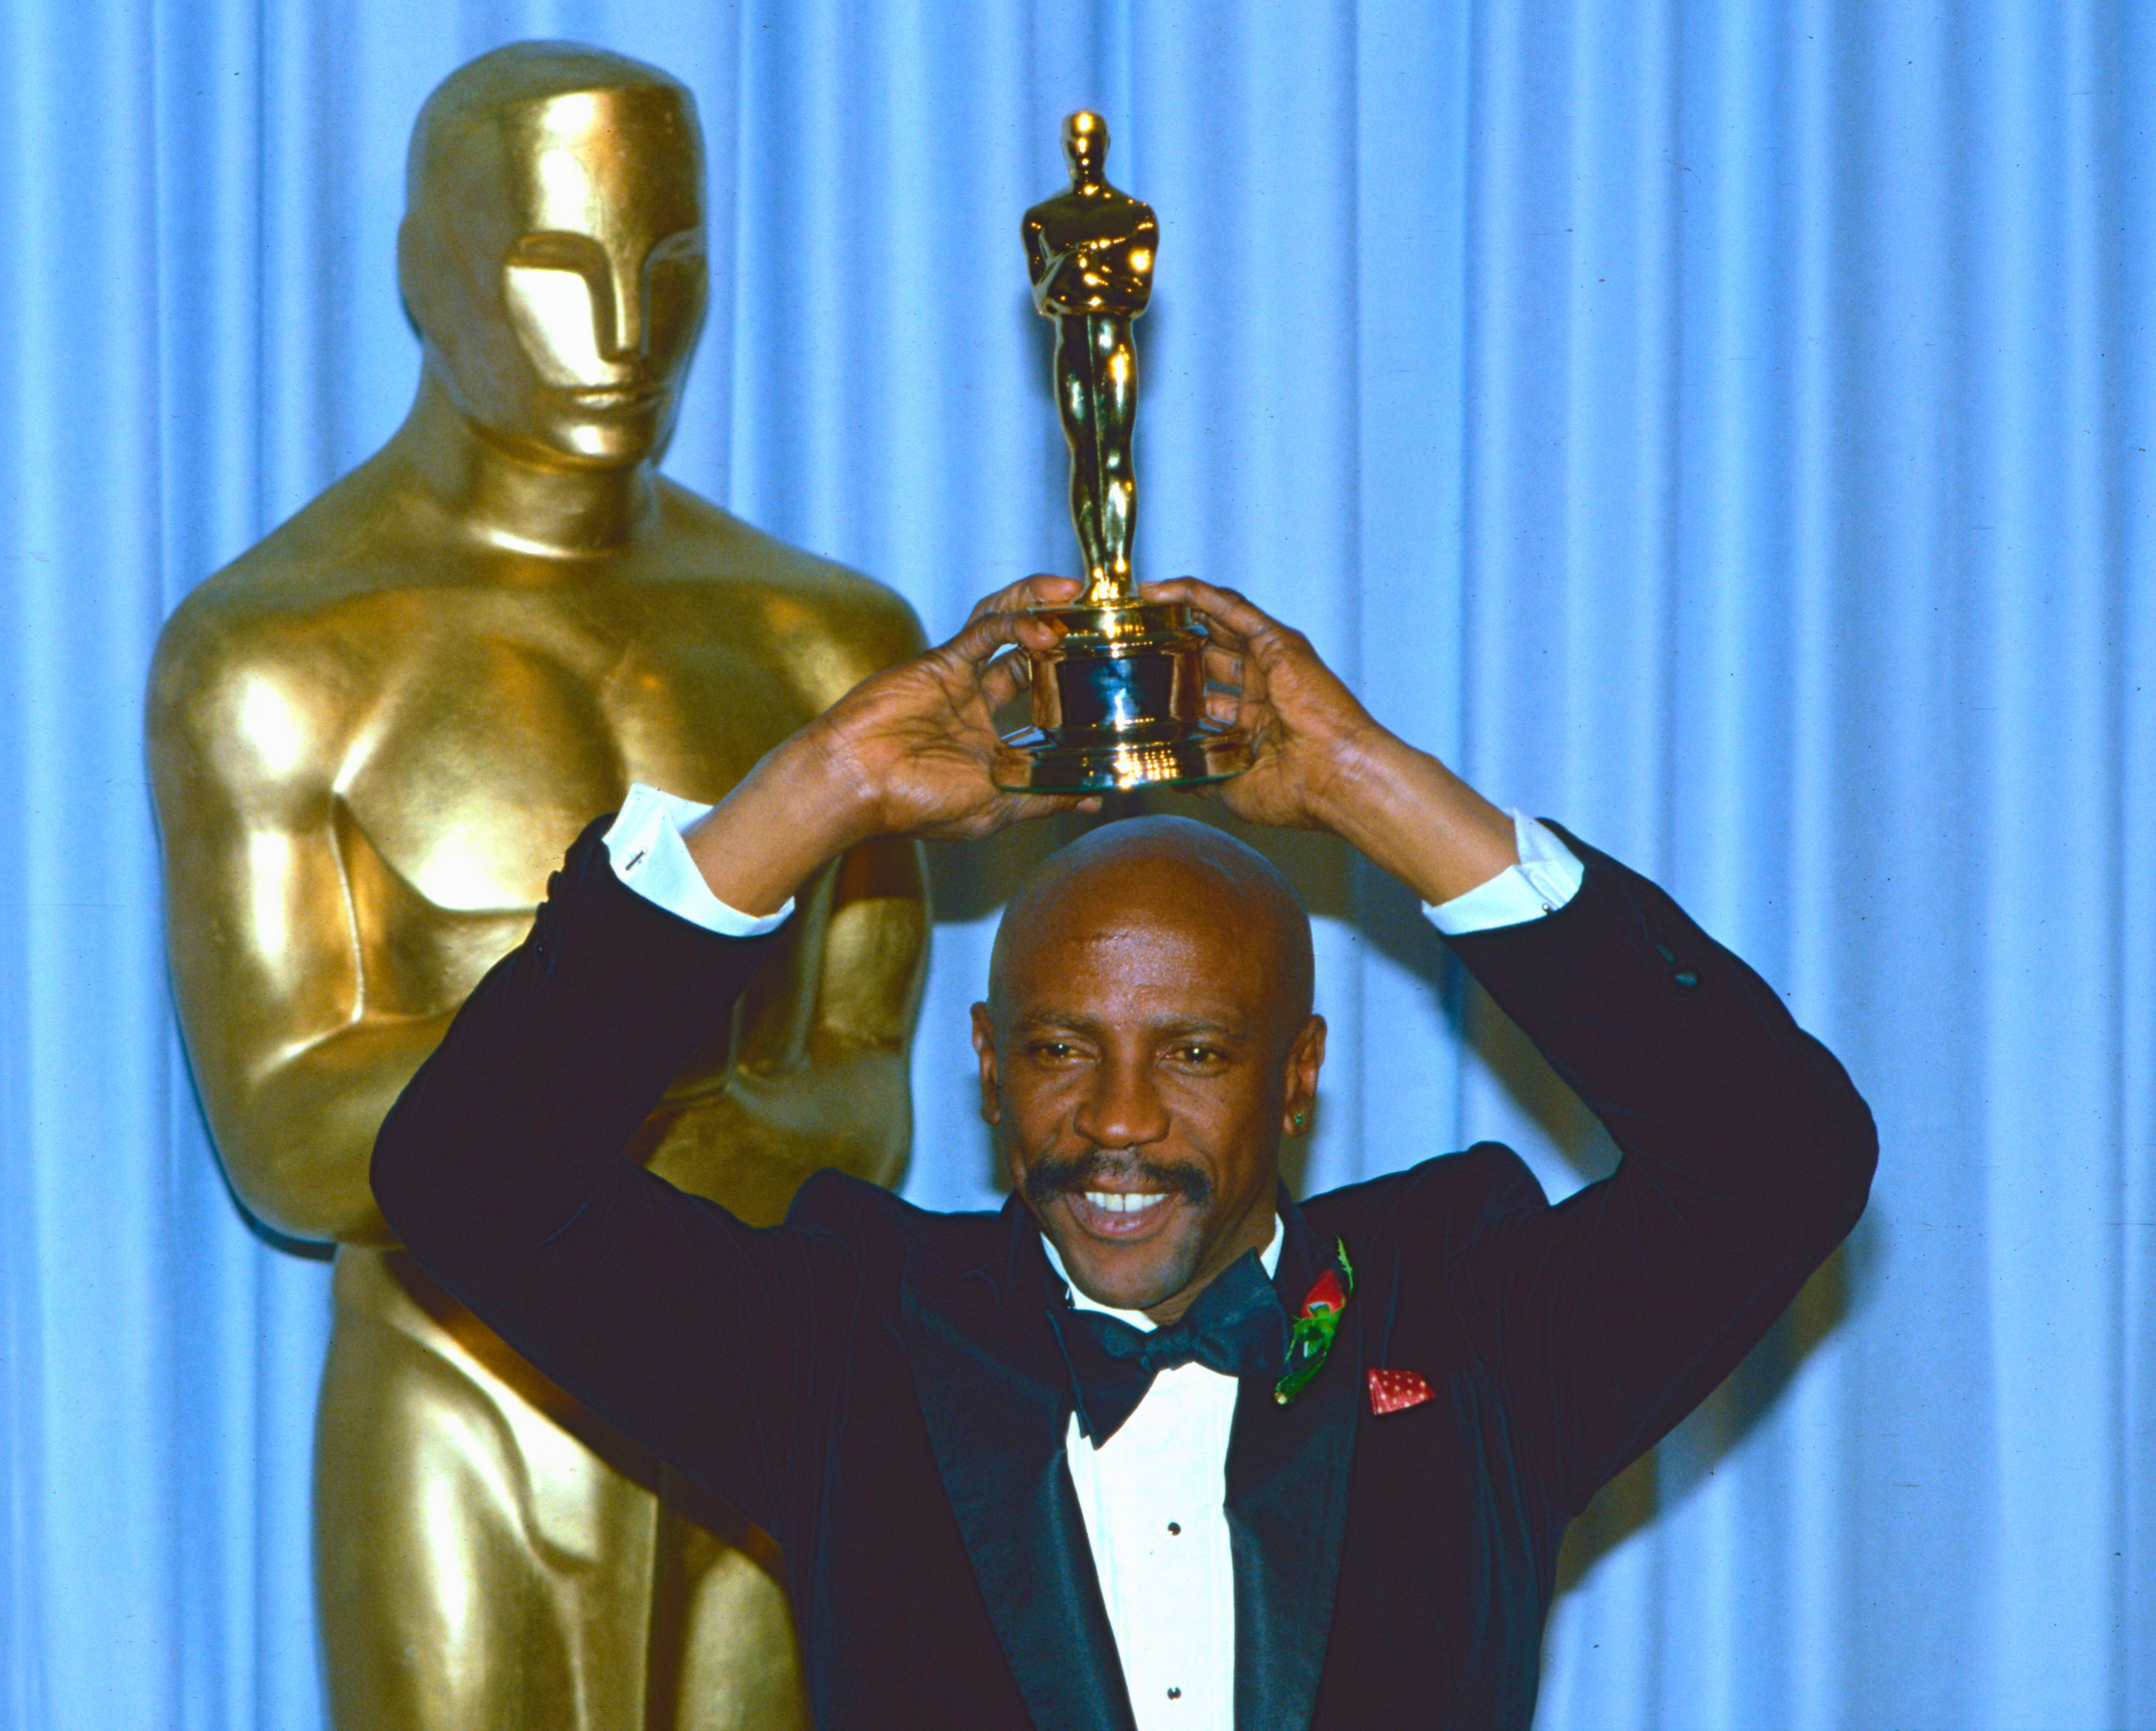 <p>We're taking a look back at some of the Black Hollywood stars, athletes, politicians and other notables who've made history and broken barriers over the years, starting with this actor...</p><p>In 1983, Louis Gossett Jr. -- who <a href="https://www.wonderwall.com/celebrity/photos/oscar-winner-who-broke-racial-barriers-dead-at-87-taylor-hackford-levar-burton-and-more-stars-react-848634.gallery">died at 87 in March 2024</a> -- became the first Black man to win an Oscar in the best supporting actor category when he took home the prize for his work in "An Officer and a Gentleman." A few years earlier, the Broadway star won an Emmy for his performance in the lauded 1977 miniseries "Roots."</p><p><em>Keep reading to see more Black stars who made history...</em></p><p>MORE: <a href="https://www.msn.com/en-us/community/channel/vid-kwt2e0544658wubk9hsb0rpvnfkttmu3tuj7uq3i4wuywgbakeva?item=flights%3Aprg-tipsubsc-v1a&ocid=social-peregrine&cvid=333aa5de5a654aa7a98a6930005e8f60&ei=2" rel="noreferrer noopener">Follow Wonderwall on MSN for more celebrity & entertainment photo galleries and content</a></p>